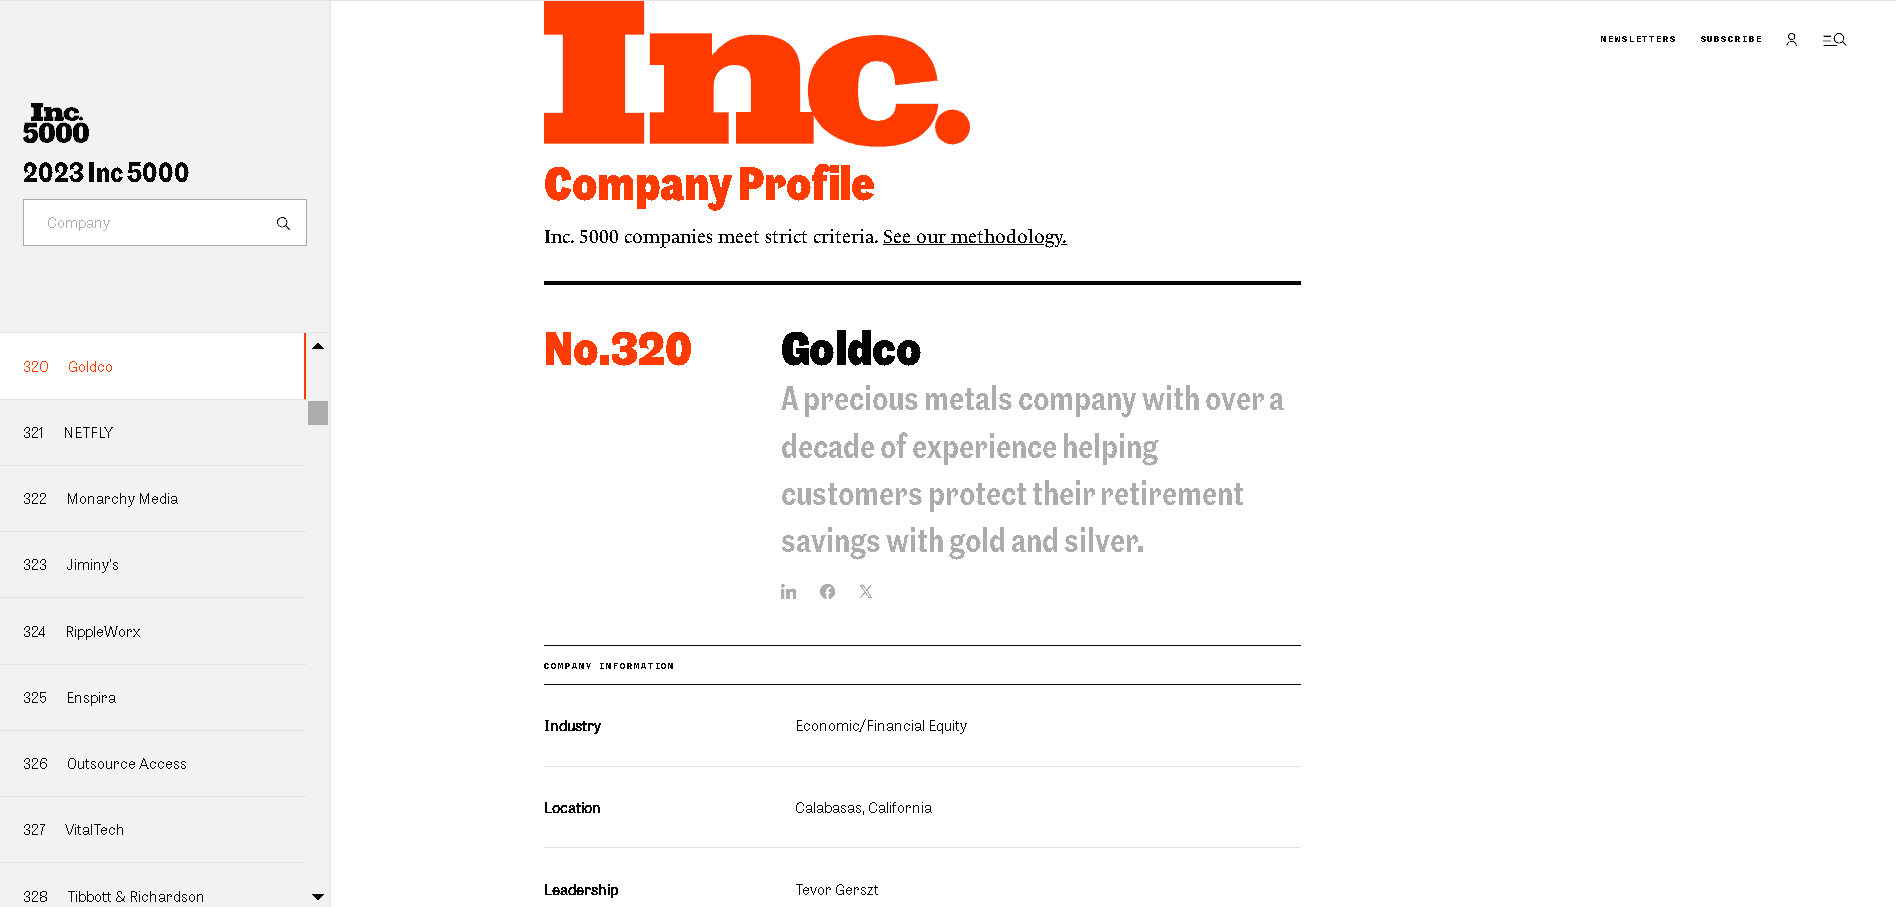 Goldco have been included on the Inc 5000 best companies list